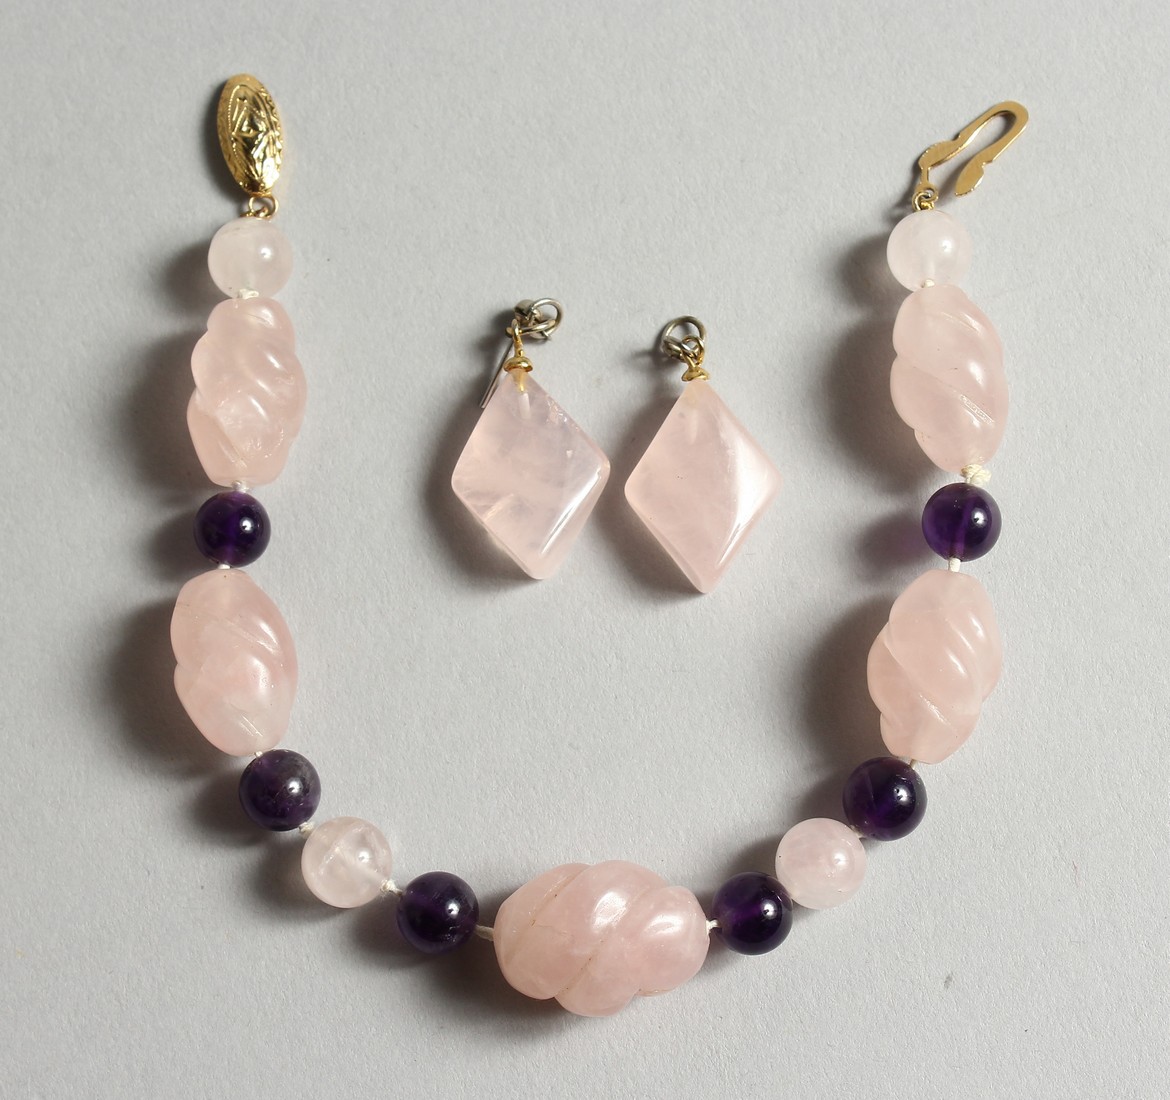 A ROSE QUARTZ AND AMETHYST BRACELET AND EARRINGS.